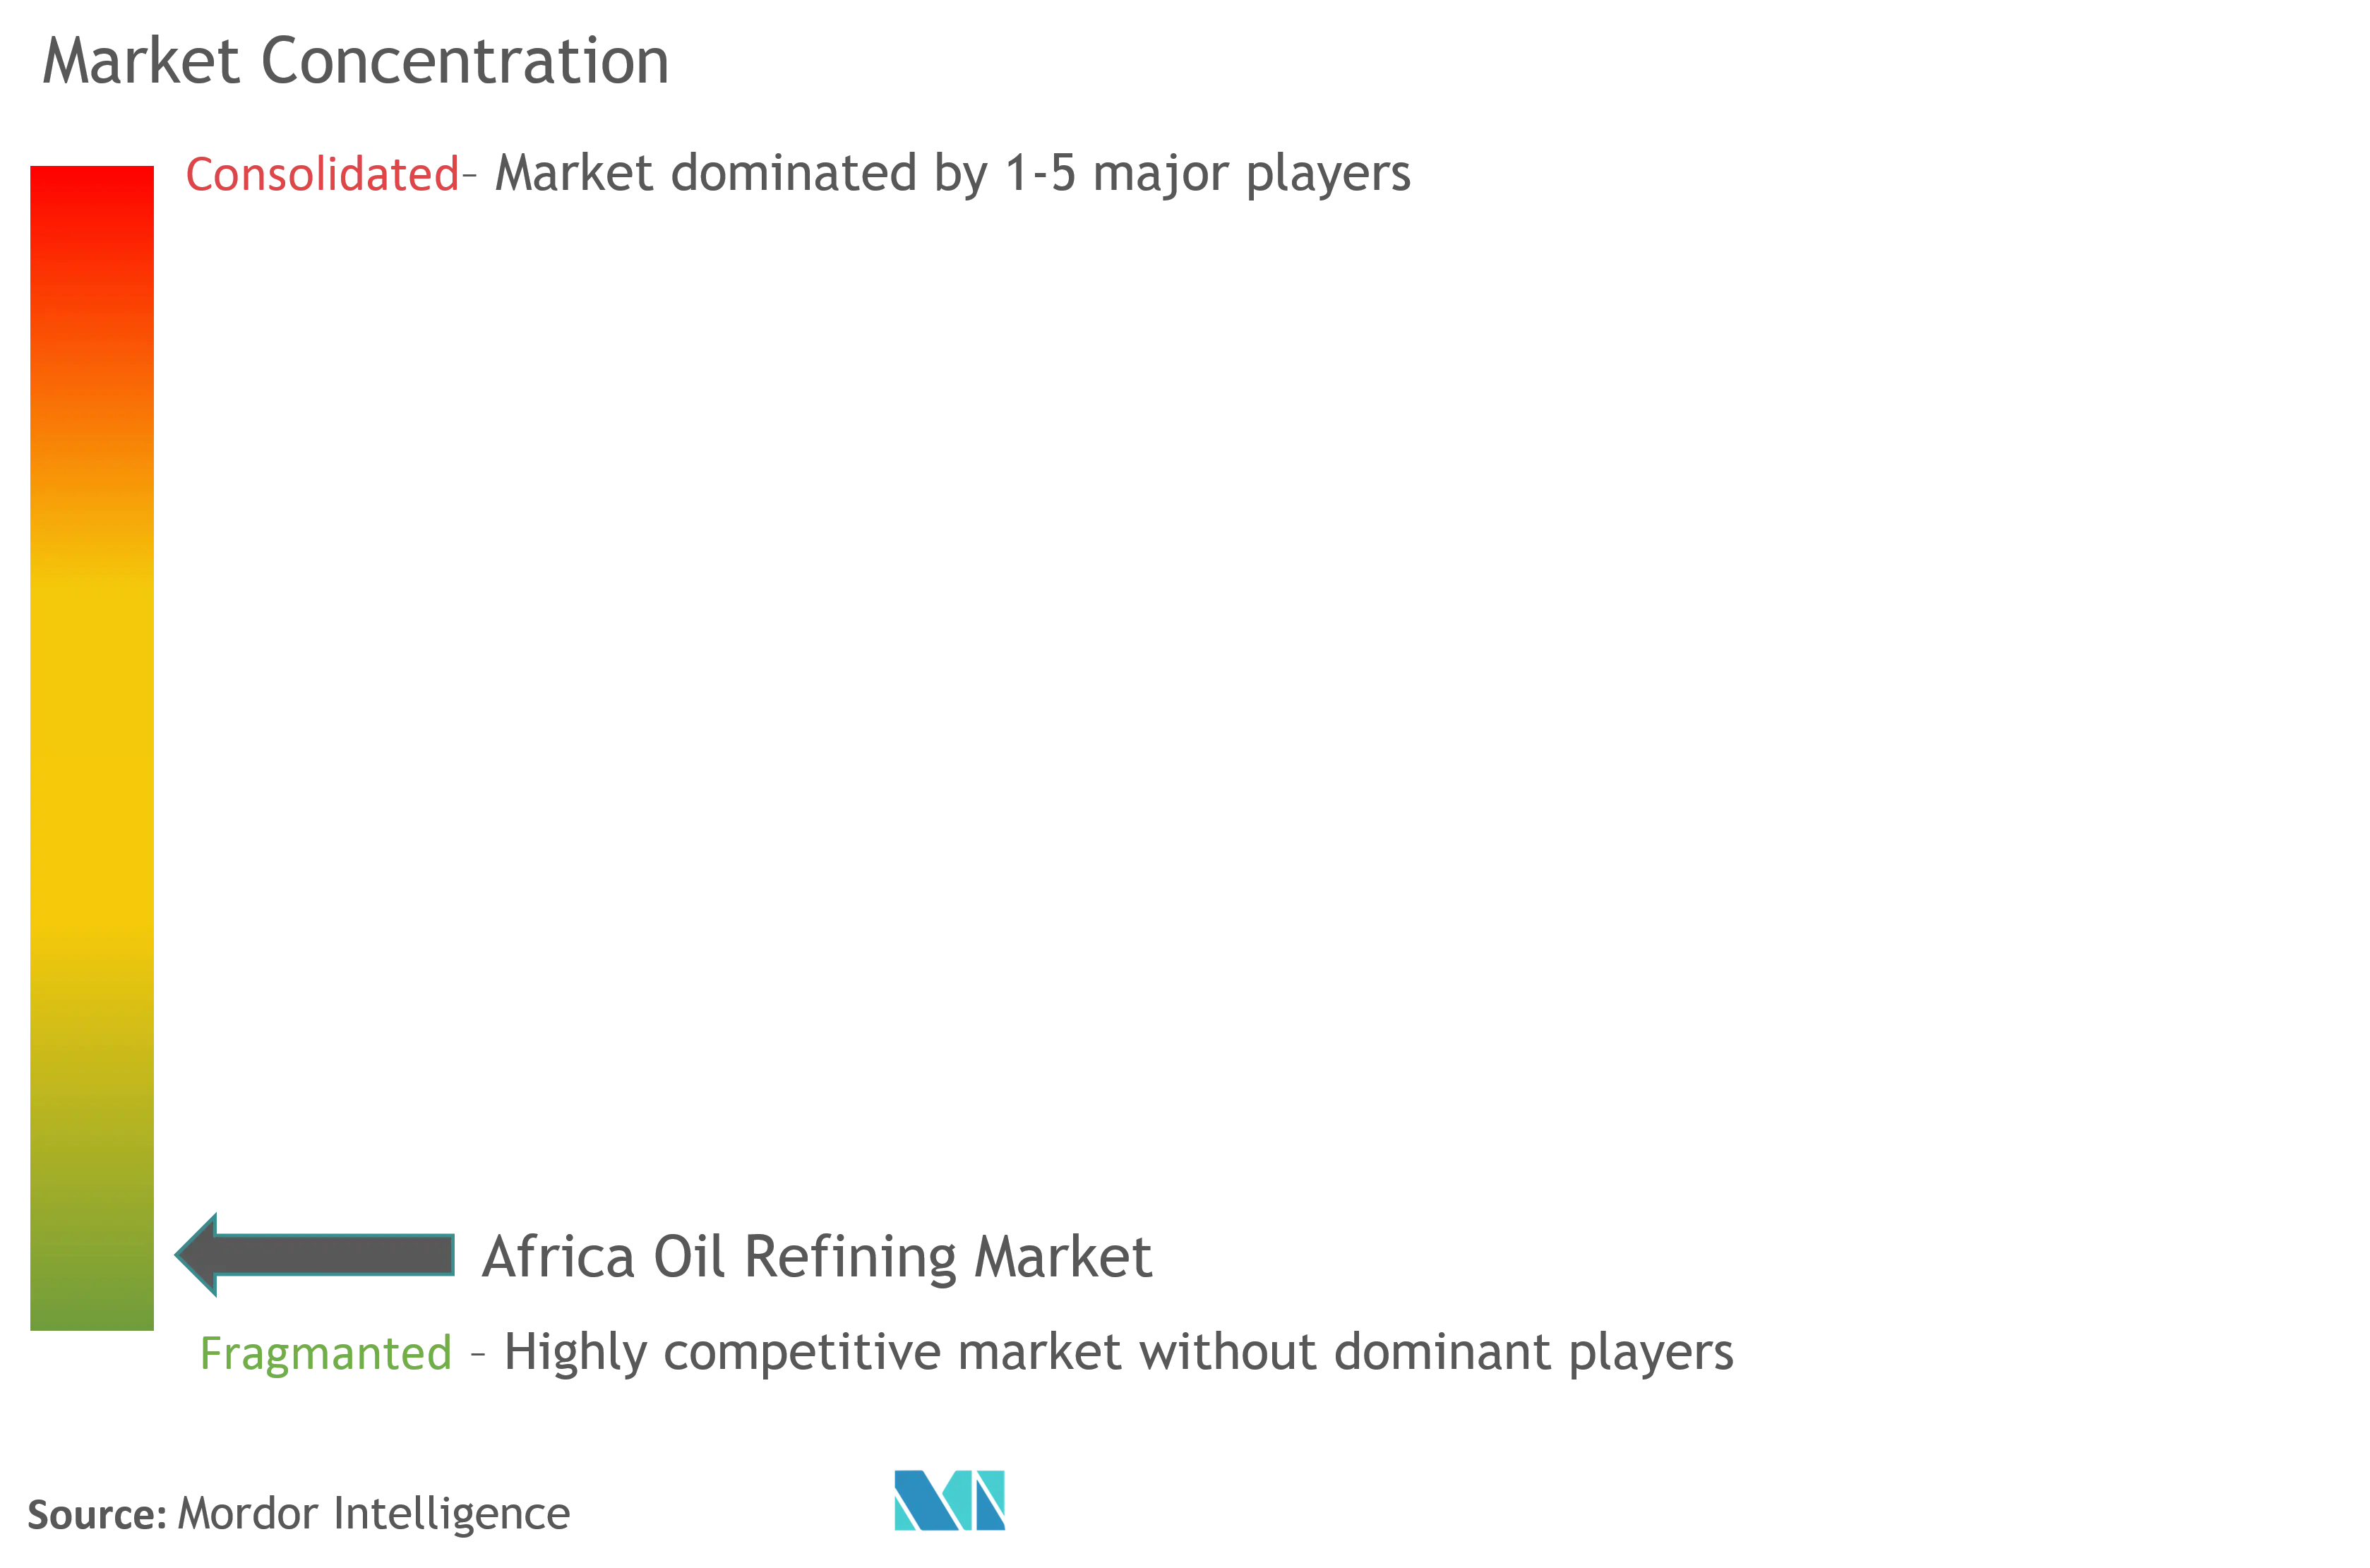 Africa Oil Refining Market Concentration